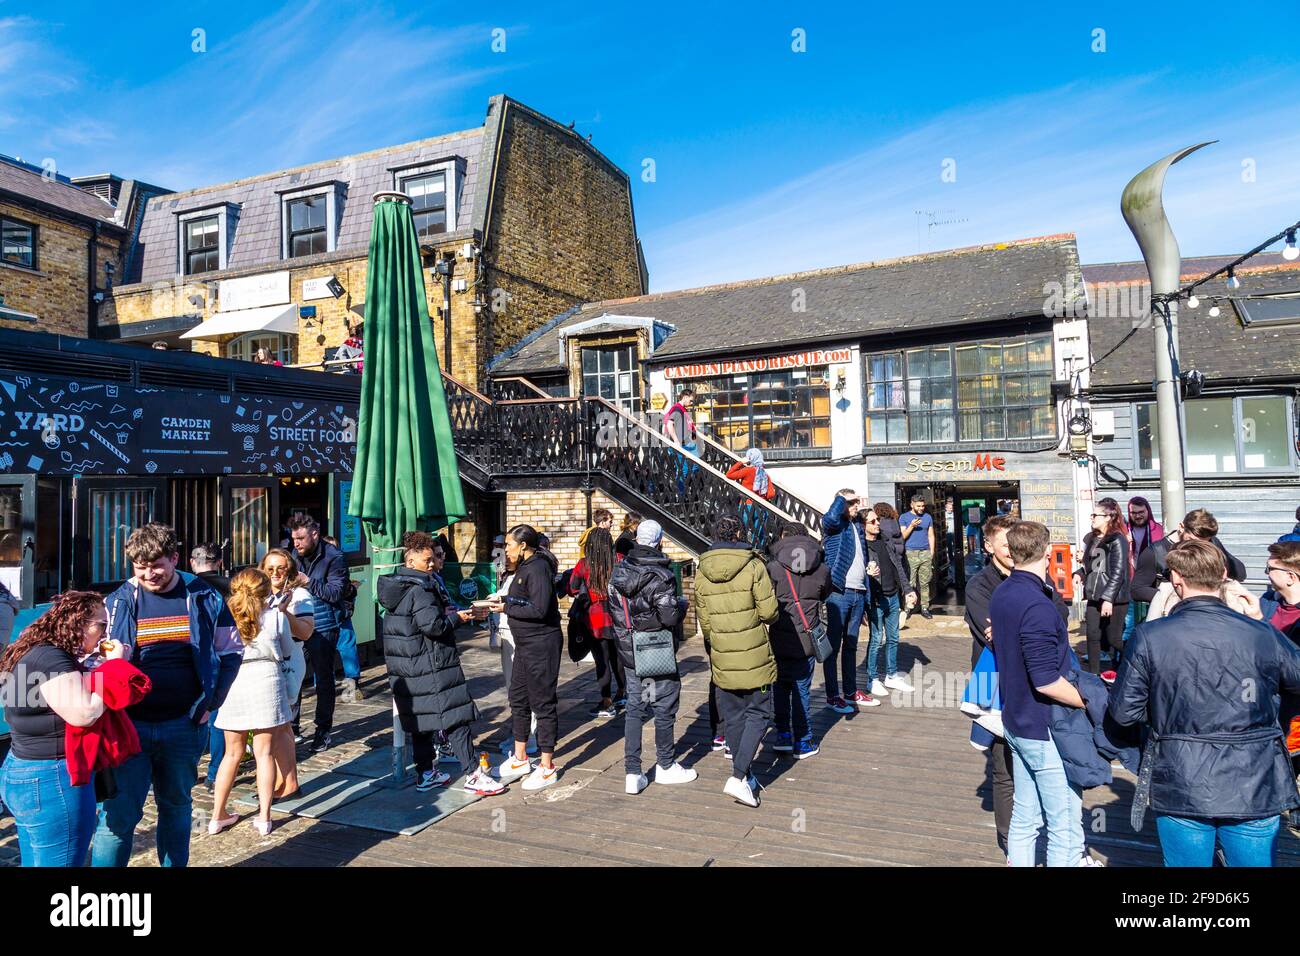 17th April 2021 - London, UK, Camden Market attracted crowds on a sunny weekend after coronavirus pandemic lockdown easing Stock Photo